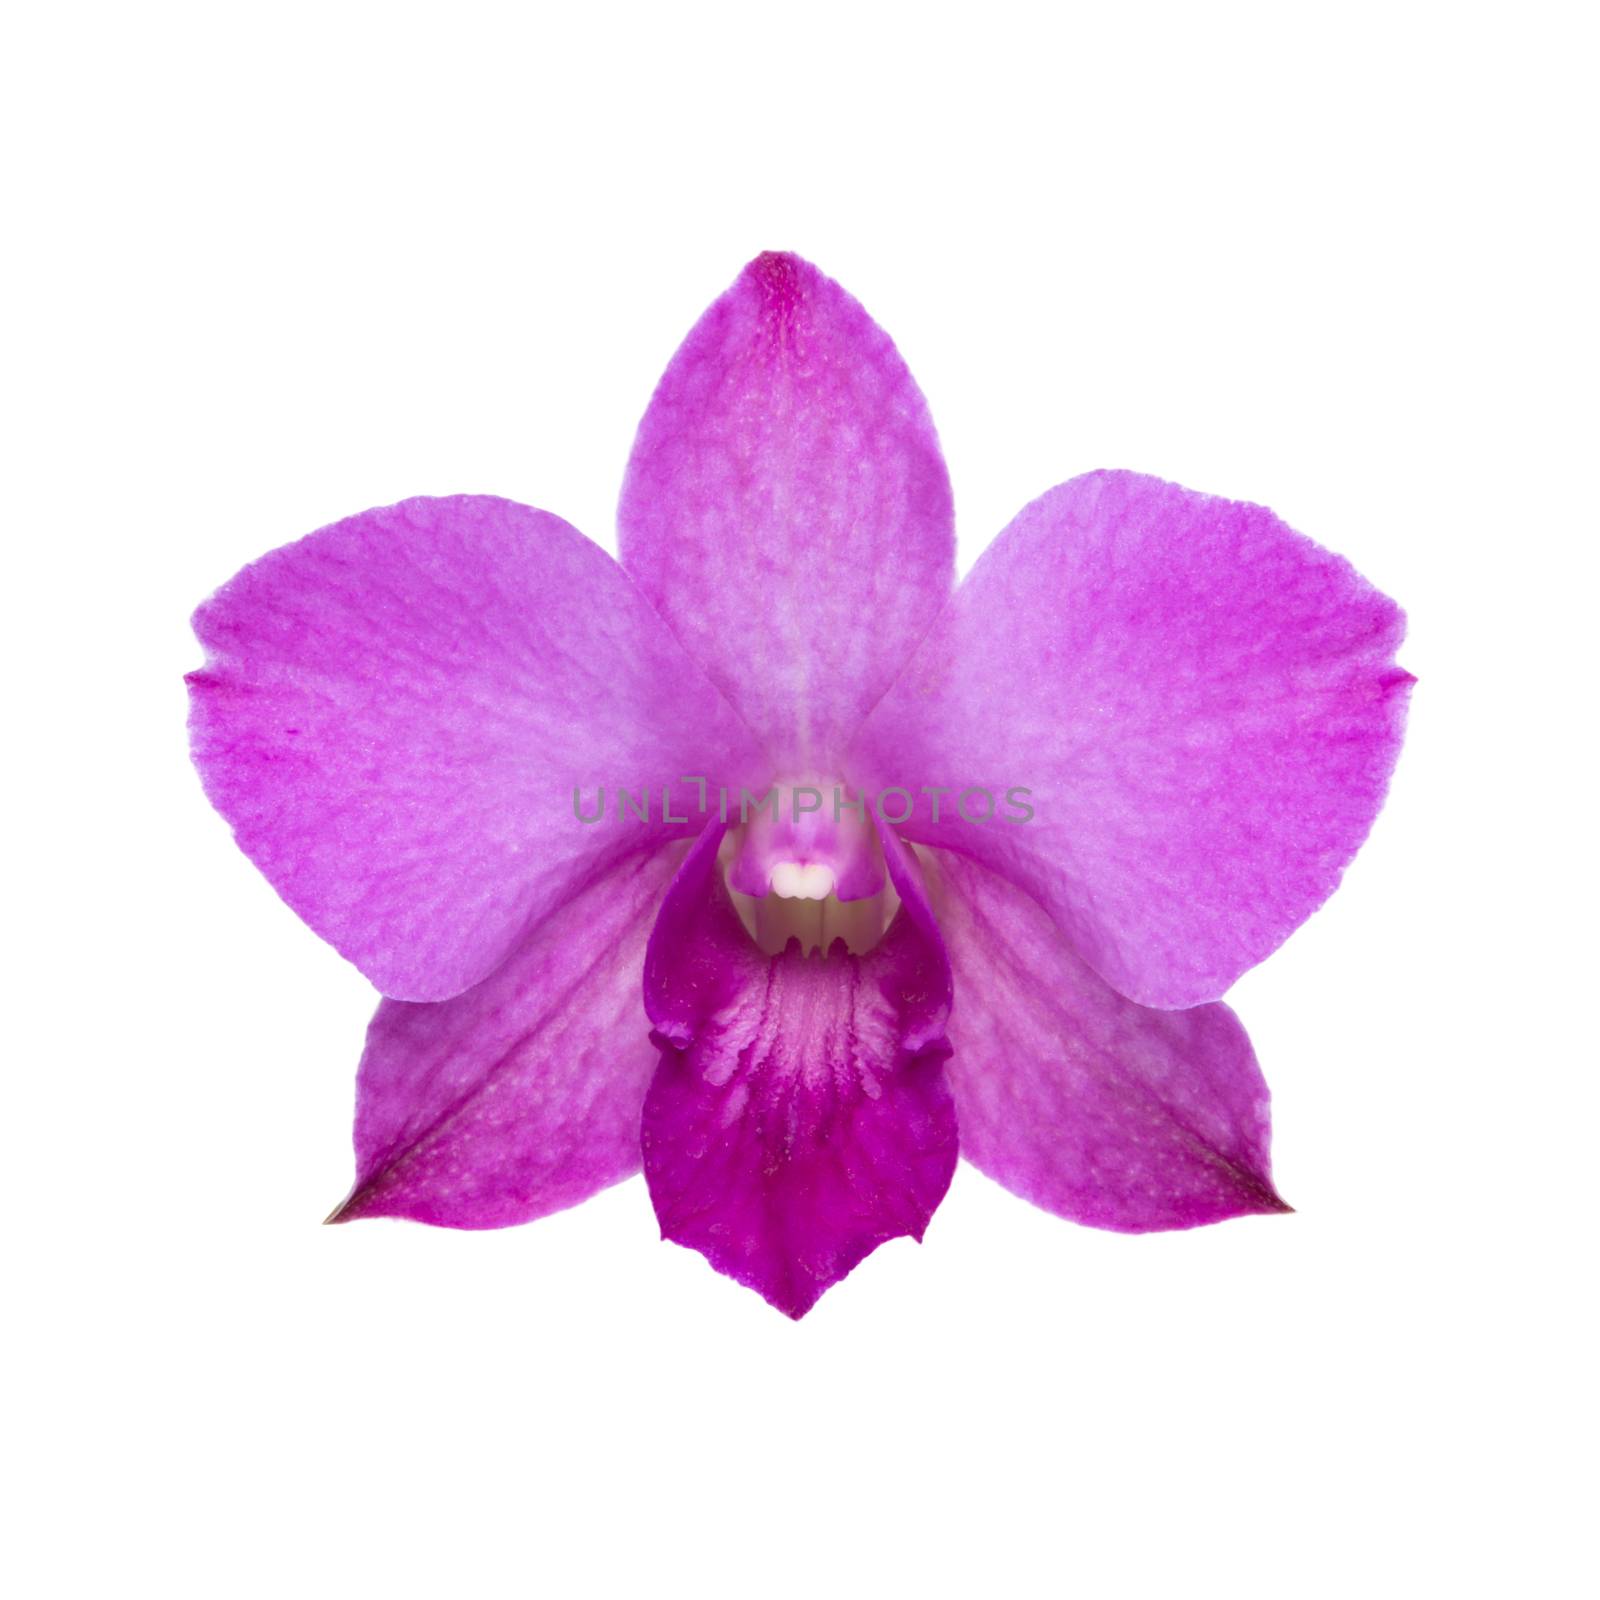 Purple orchid by AEyZRiO